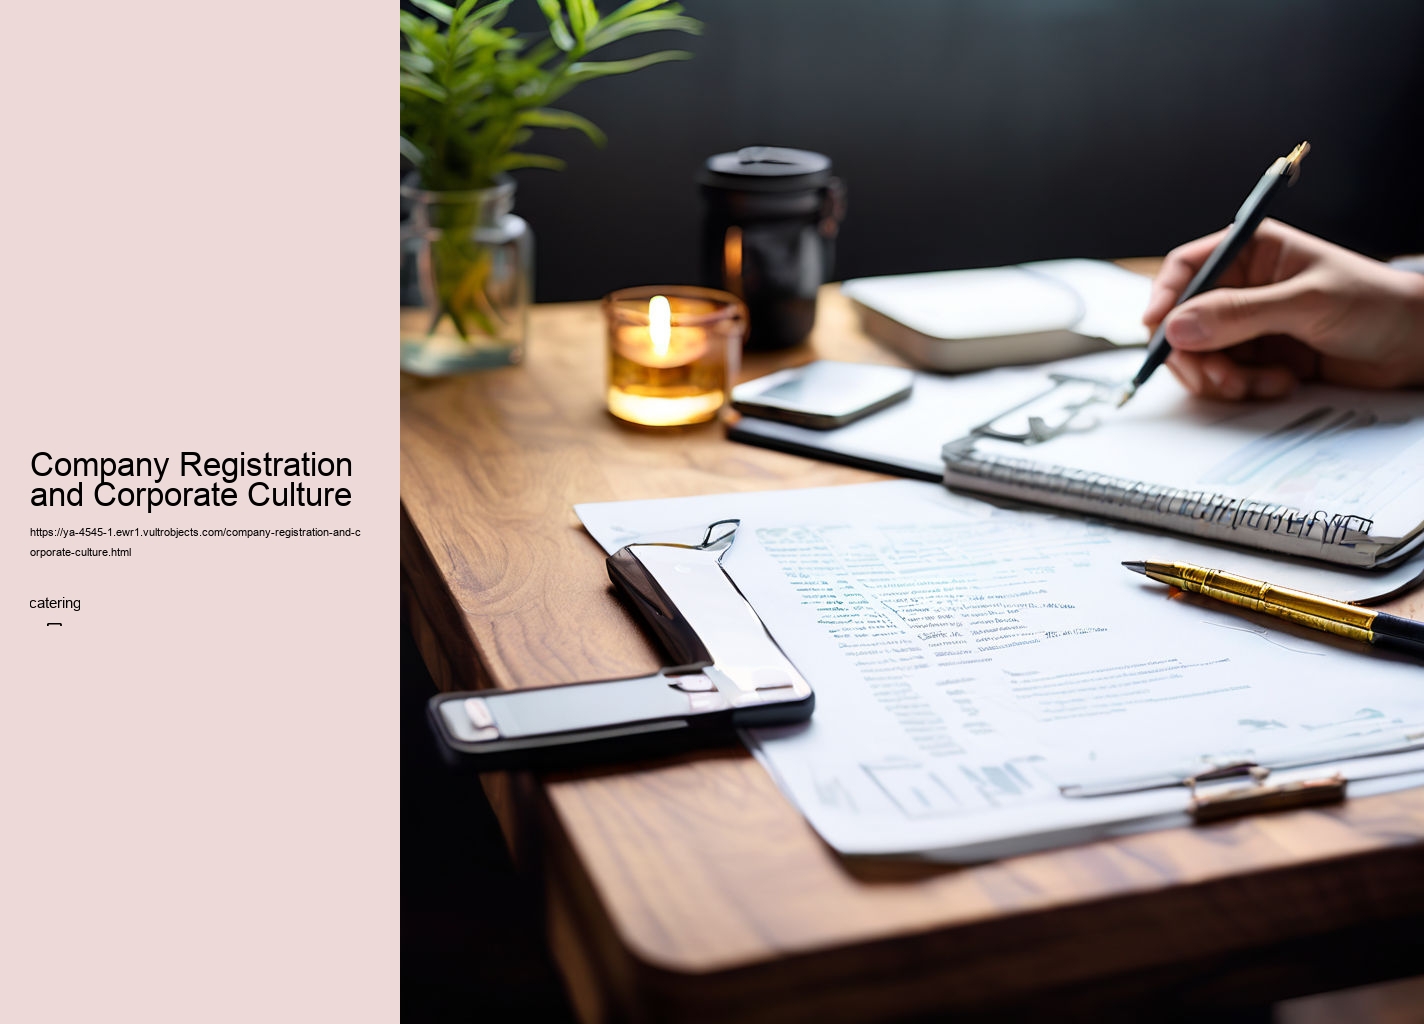 Company Registration and Corporate Culture